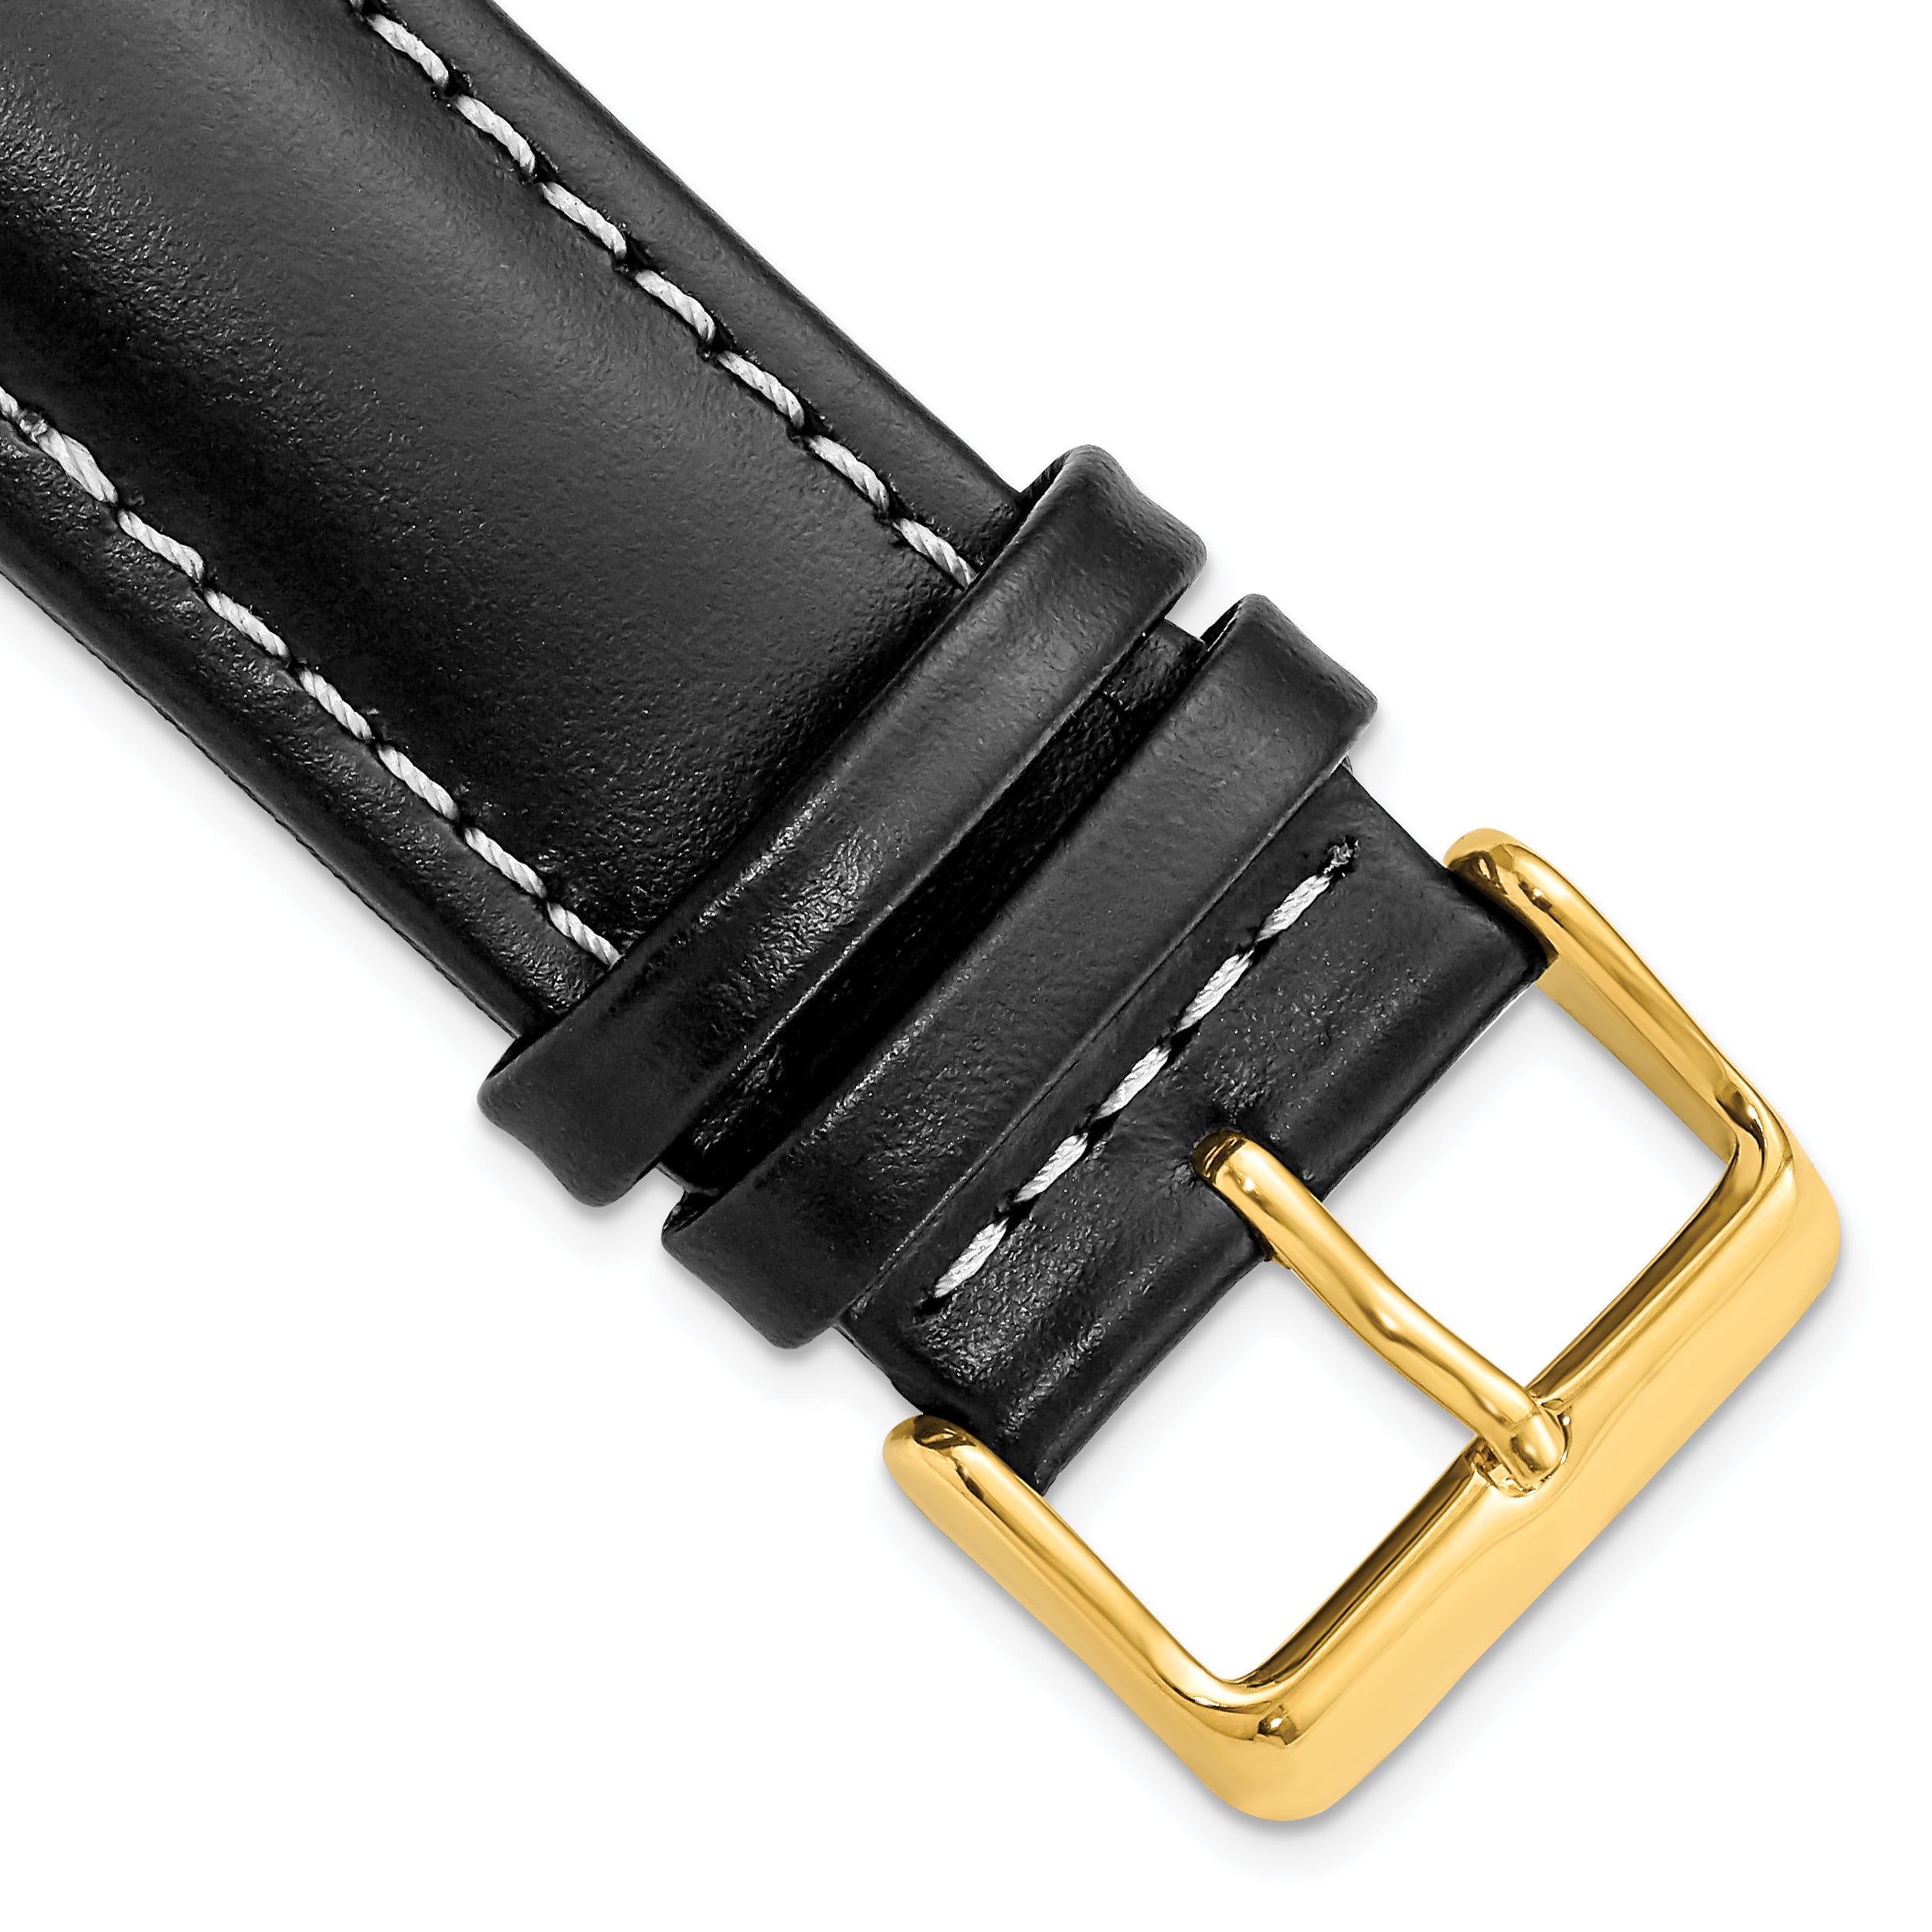 DeBeer 24mm Black Oil-tanned Leather with White Stitching and Gold-tone Buckle 7.5 inch Watch Band